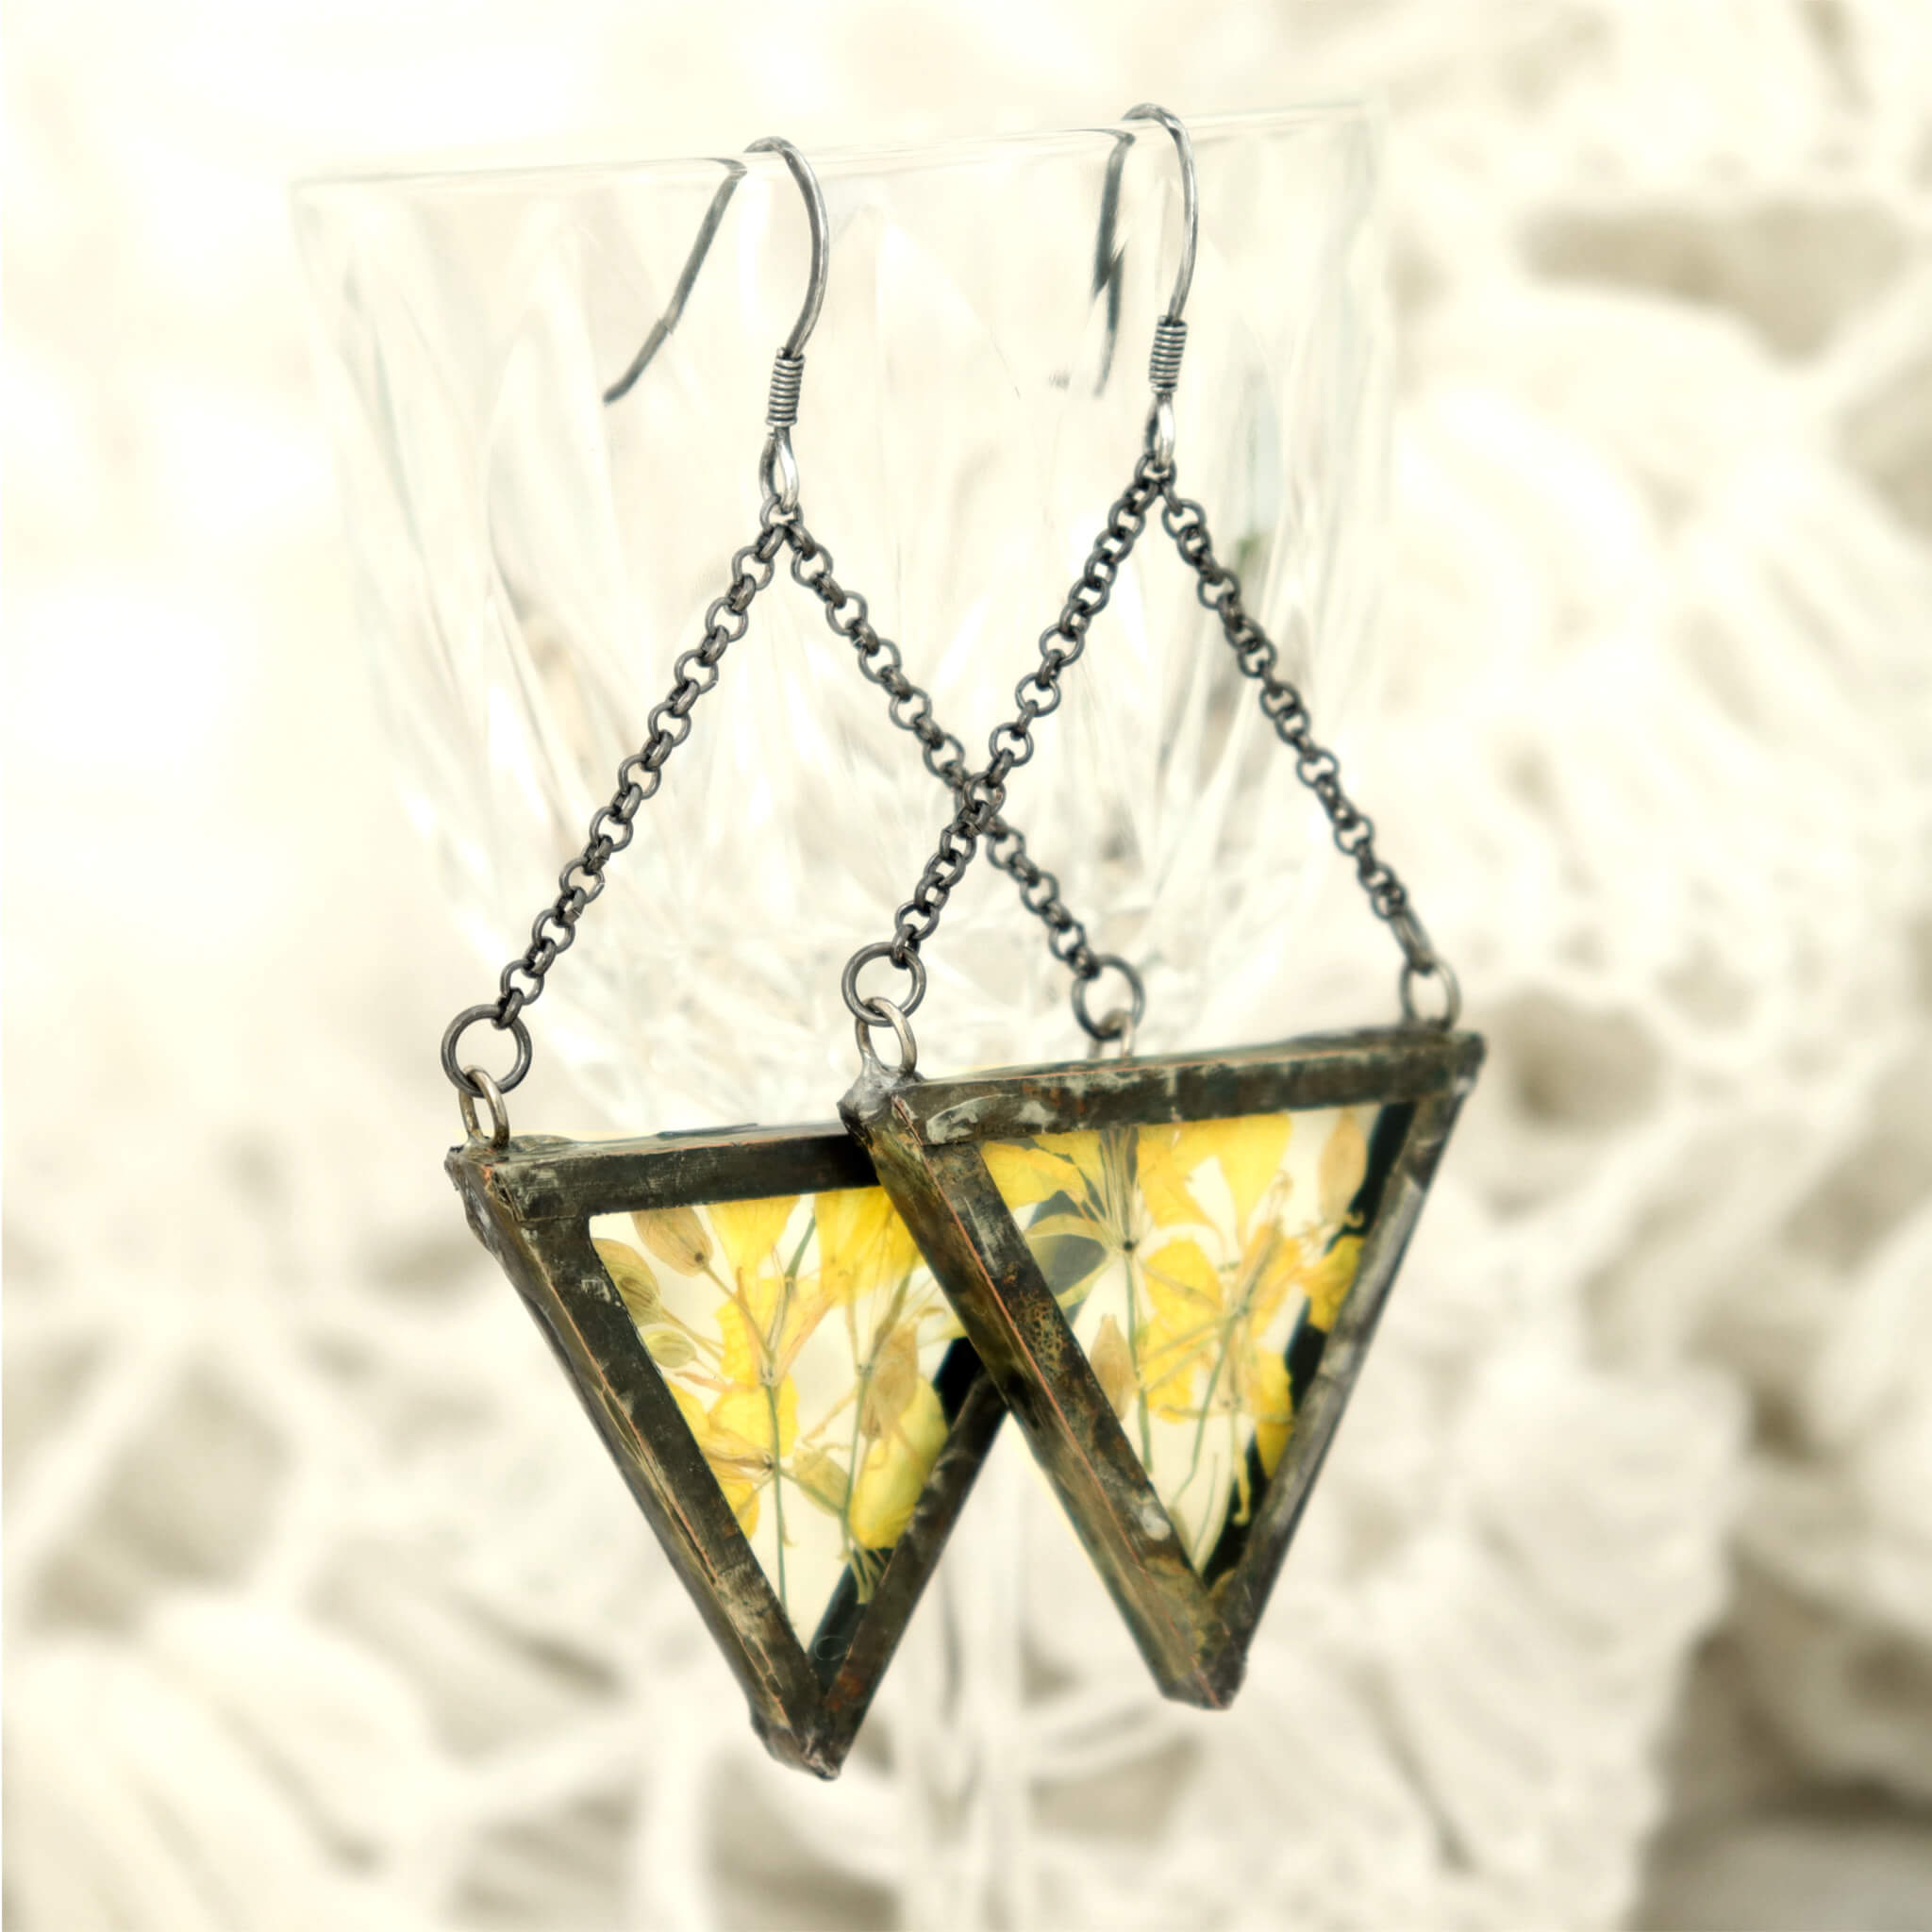 Triangular pressed yellow flower earrings hanging from an edge of a glass